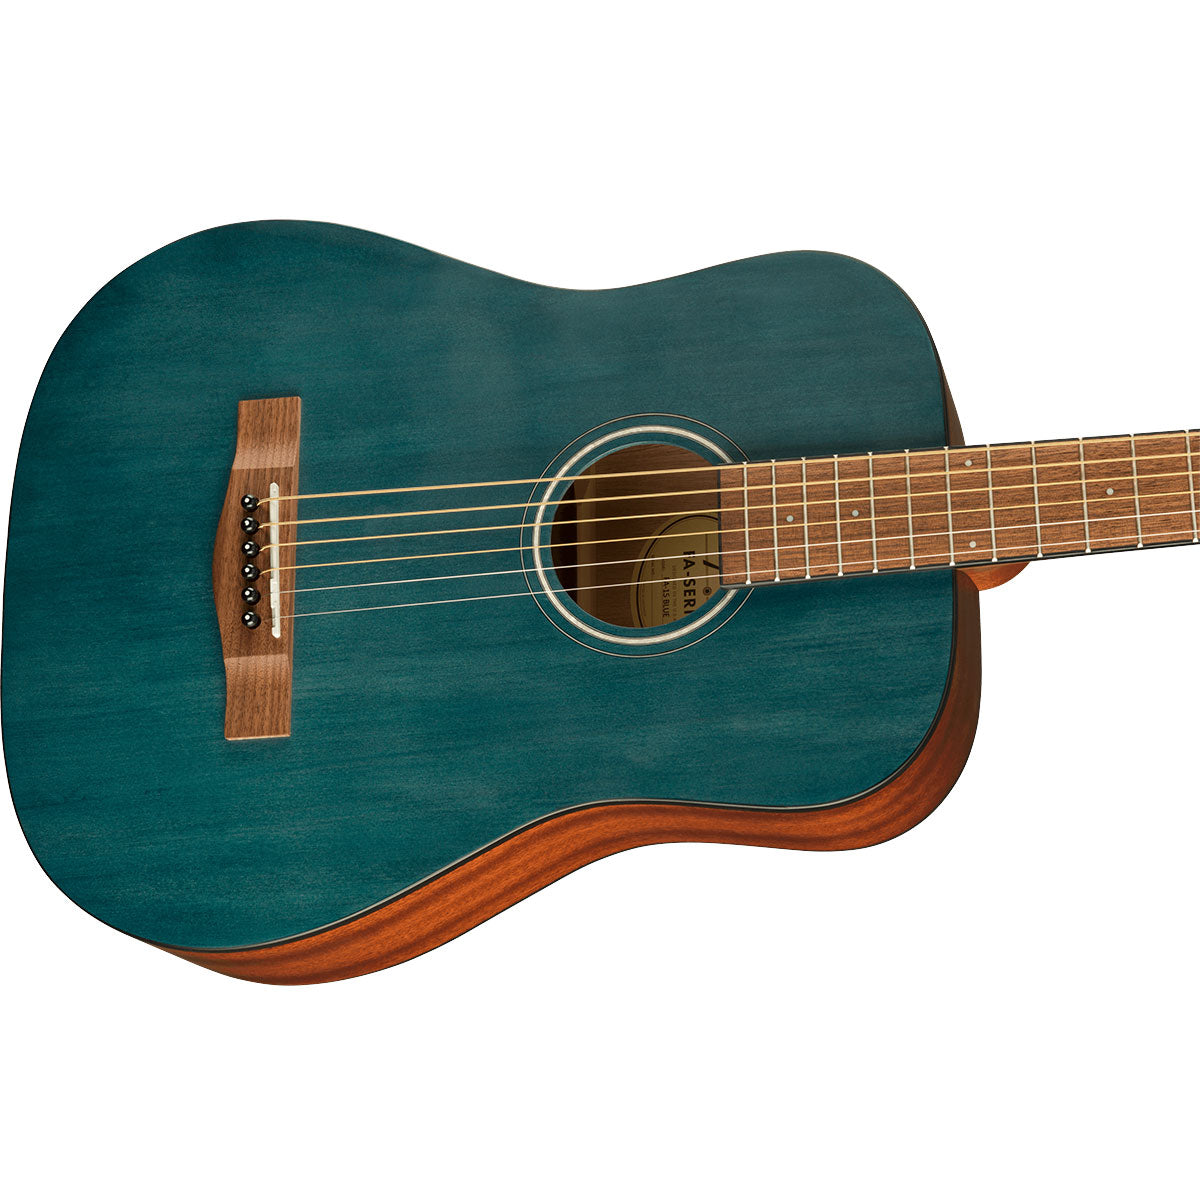 Close-up perspective view of Fender FA-15 3/4 Steel Acoustic Guitar - Blue showing top and right side of body and portion of fretboard